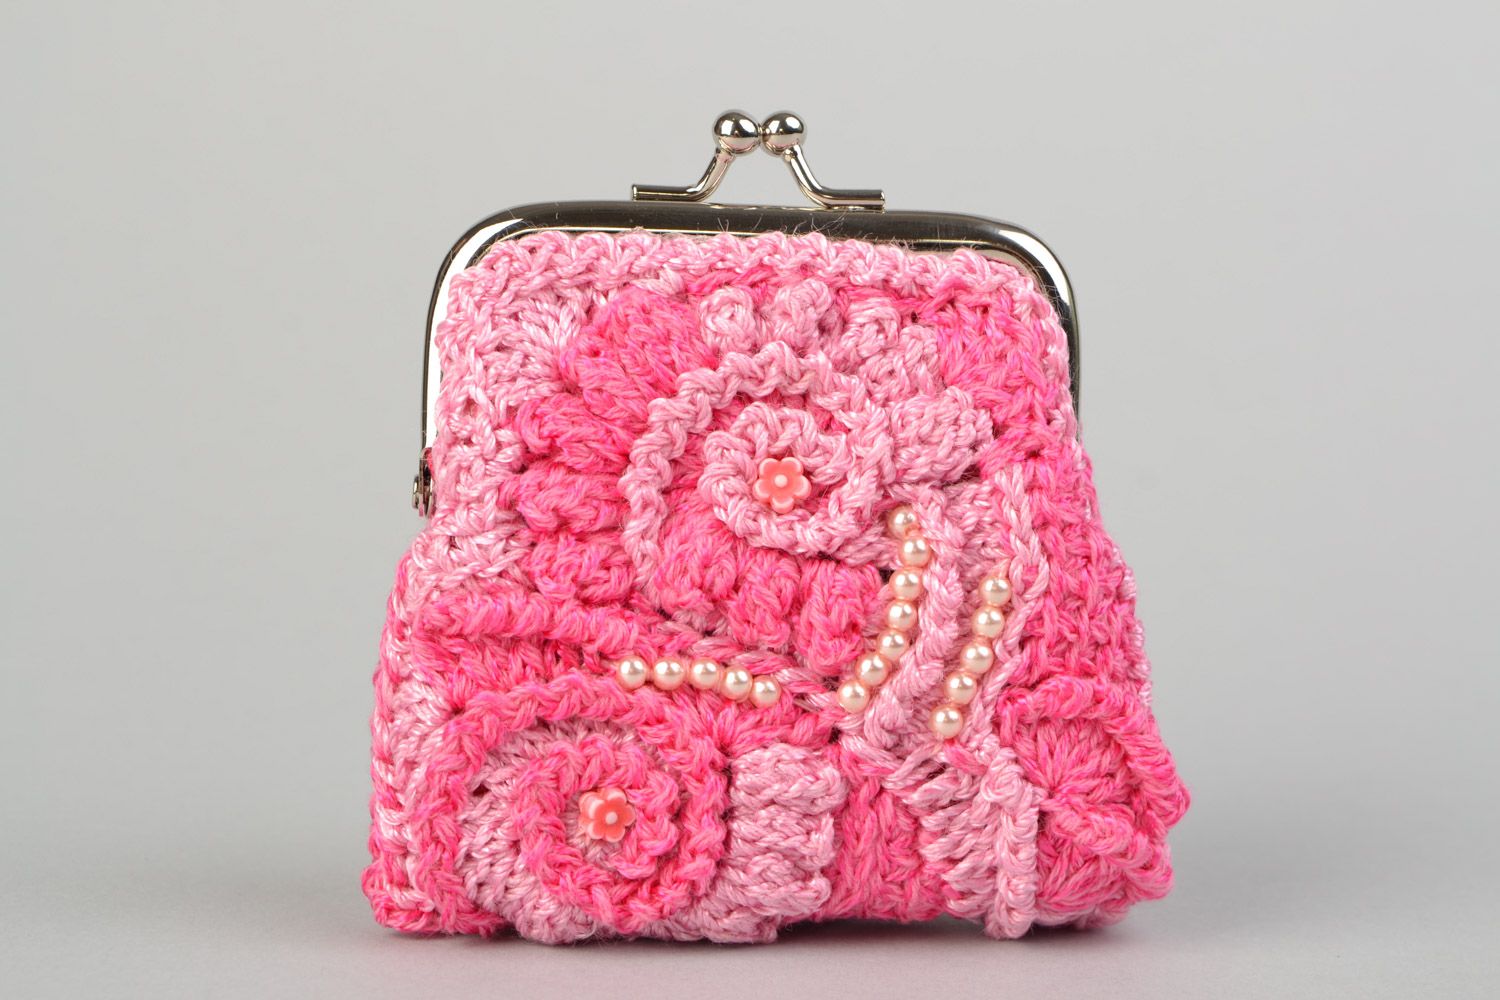 Handmade pink lacy coin purse crochet of cotton threads with fermail fastener photo 1